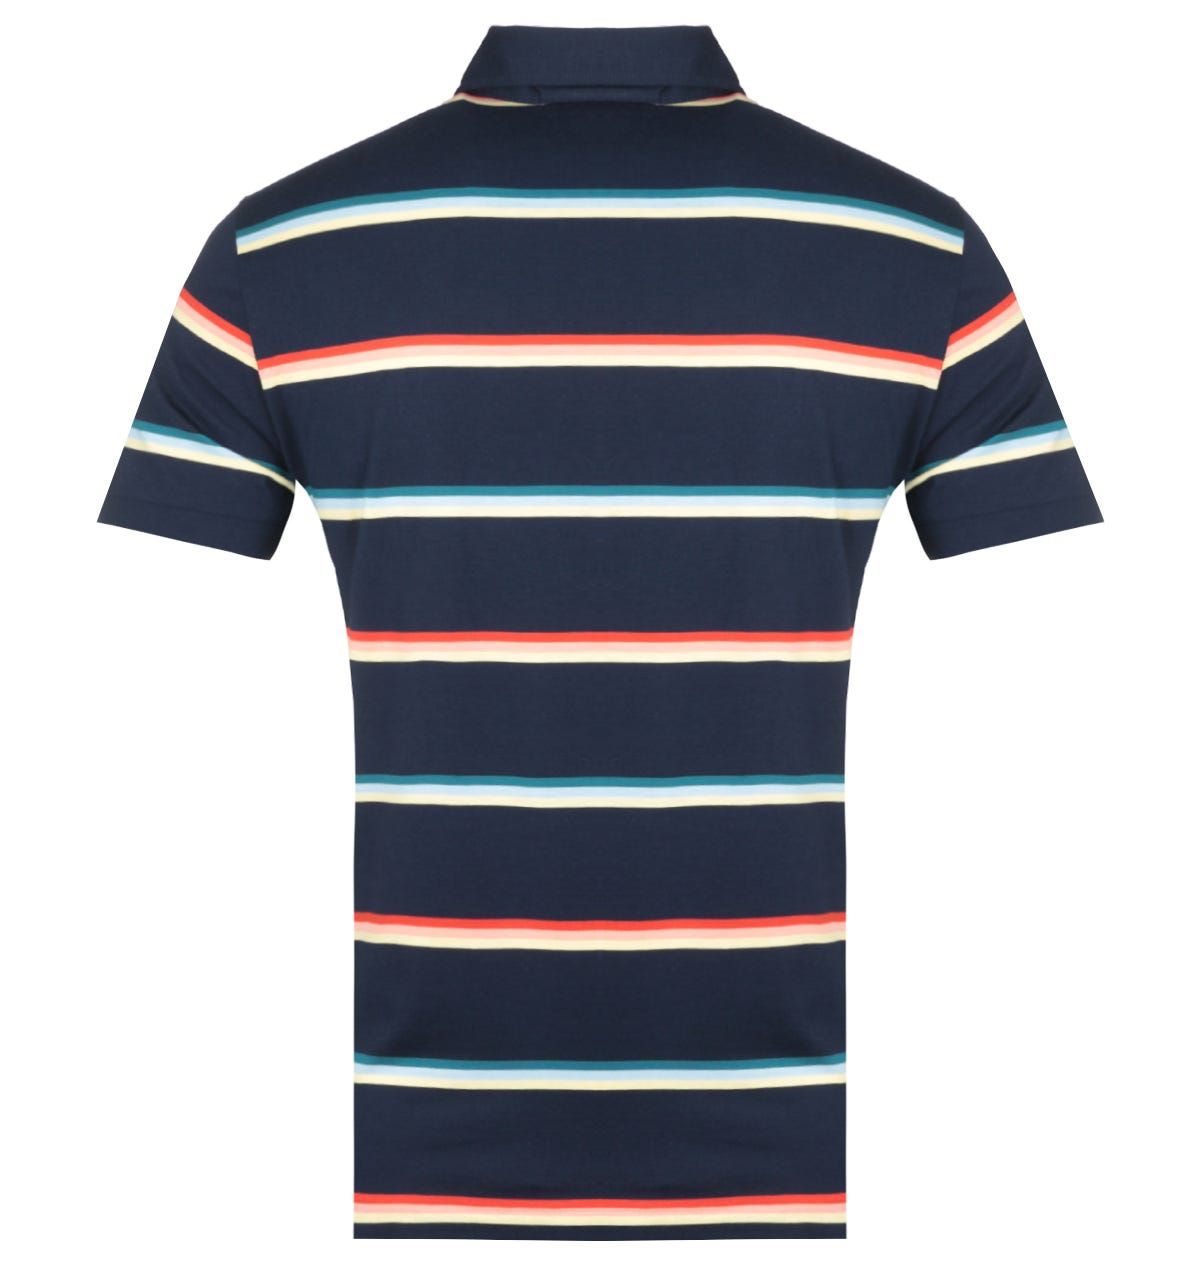 <p>A pure cotton composition crafted by Lacoste. The Lacoste Stripe Navy MC Homme Polo Shirt is fitted with a three-button placket, spread collar and ribbed trims. The design is finished with the Lacoste logo embroidered on the chest.</p><ul><li>Cotton composition</li><li>Crew neck</li><li>Stripe design</li><li>Tonal stitching</li><li>Ribbed trims</li><li>Lacoste logo embroidered on chest</li></ul><p>Style & Fit:</p><ul><li>Regular fit</li><li>Fits true to size</li></ul><p>Fabric Composition & Care:</p><ul><li>100% Cotton</li><li>Machine washable</li></ul>